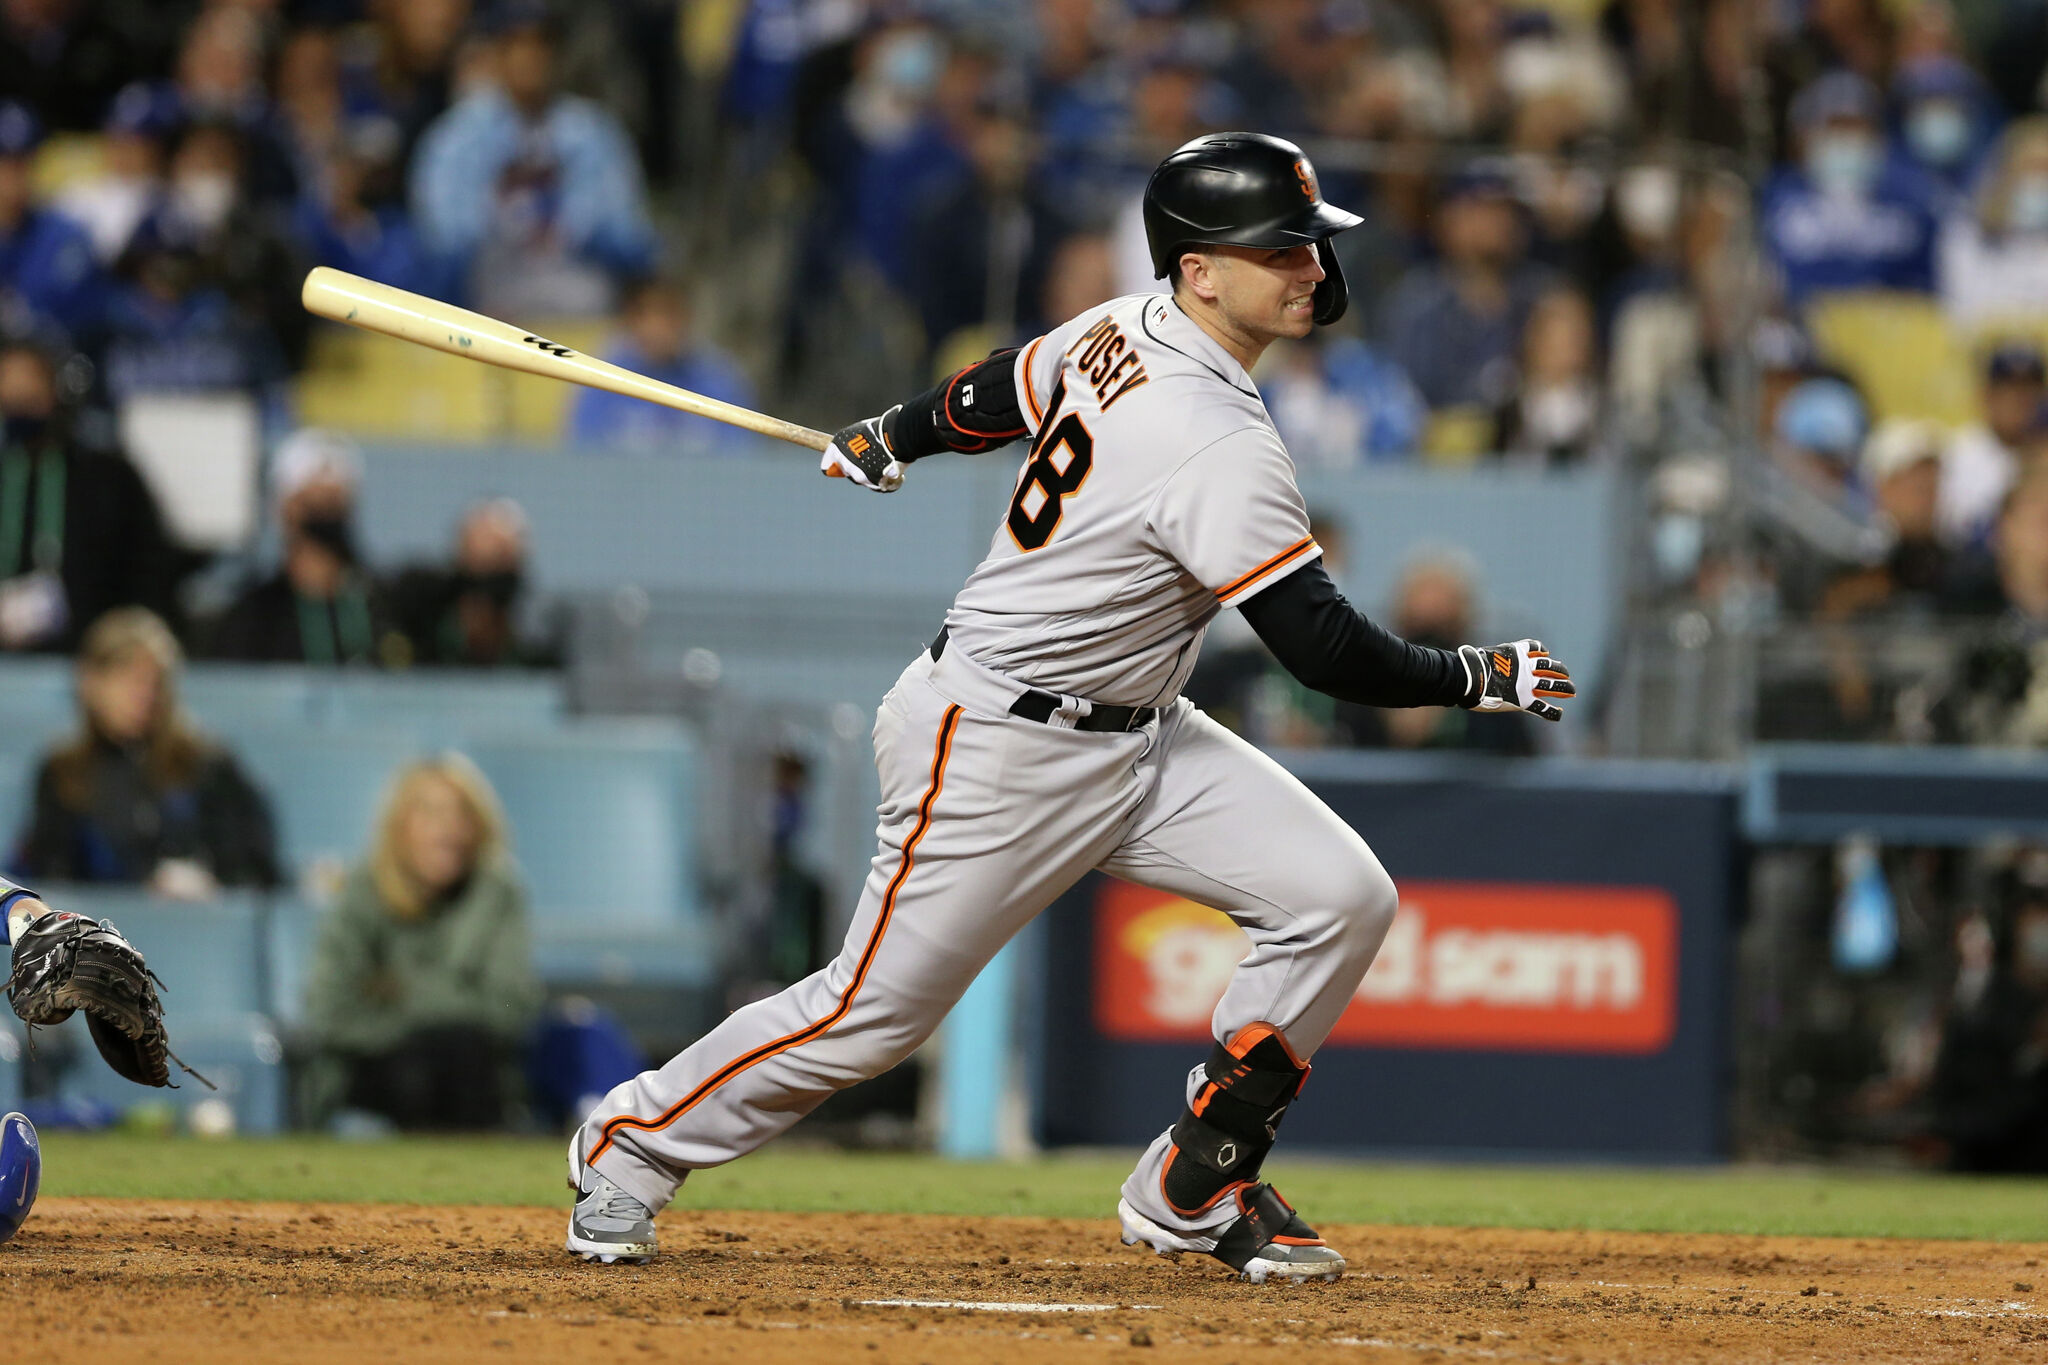 San Francisco Giants legend Buster Posey lists his 106-acre